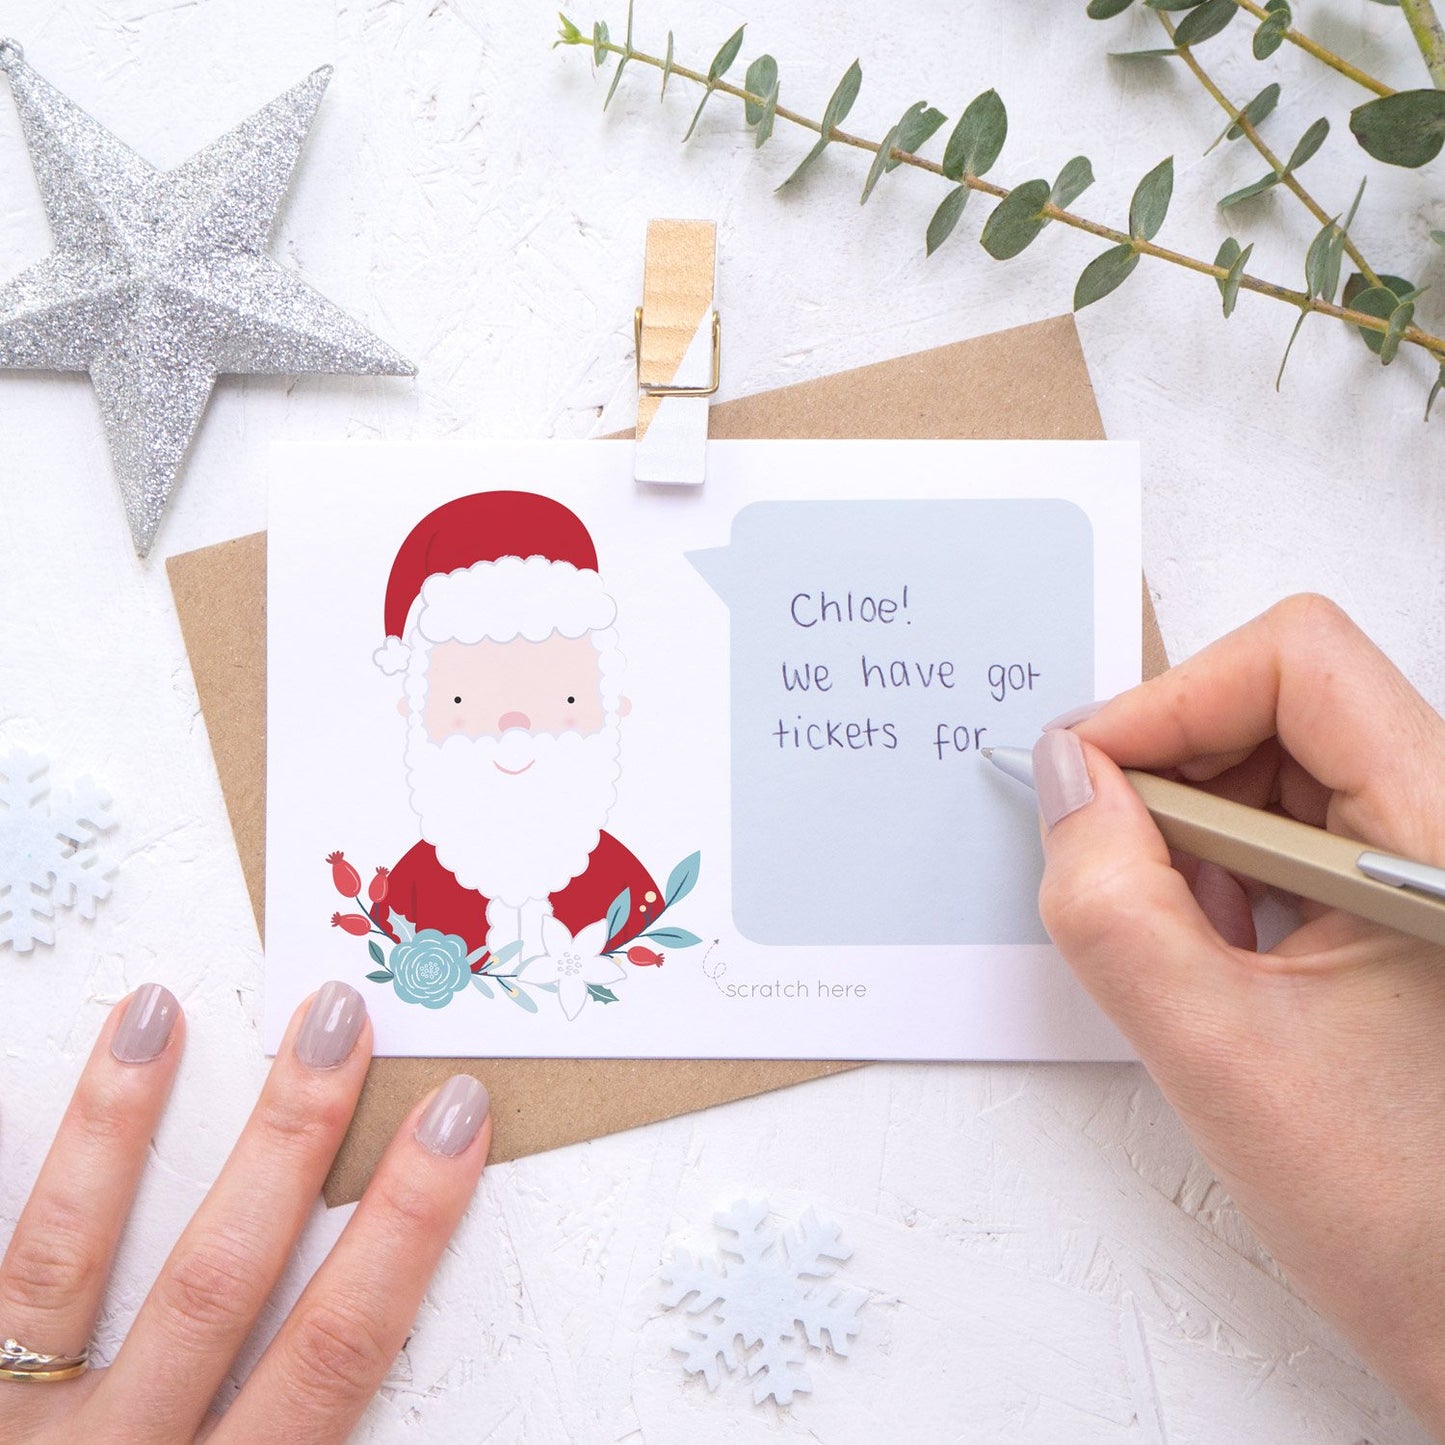 Personalised Santa secret message Christmas scratch card being hand written.